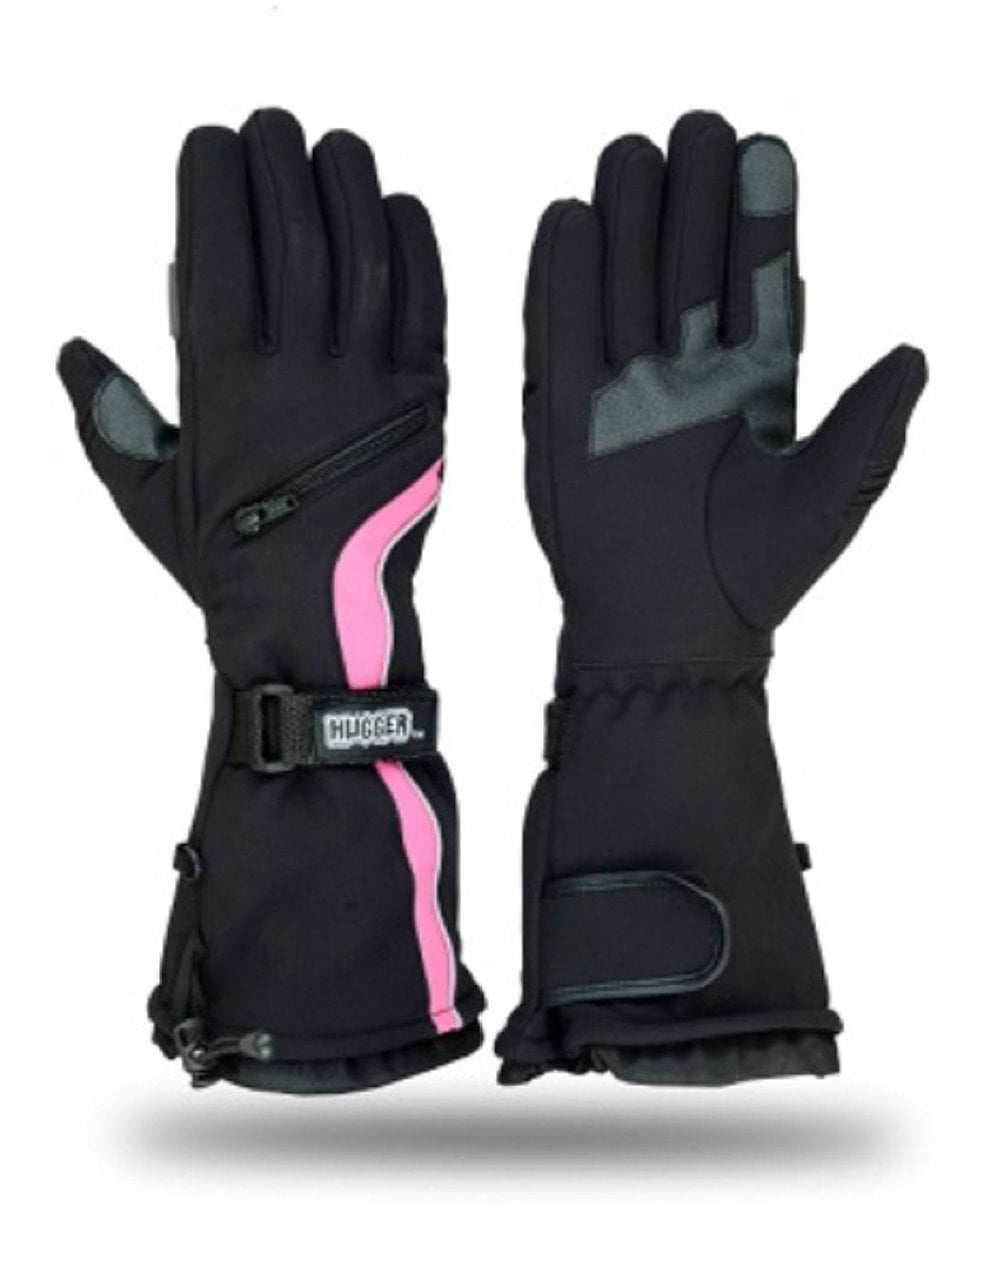 Ladies Winter Snowmobile Gloves Ski Driving Cold Weather Hand Protection Womens